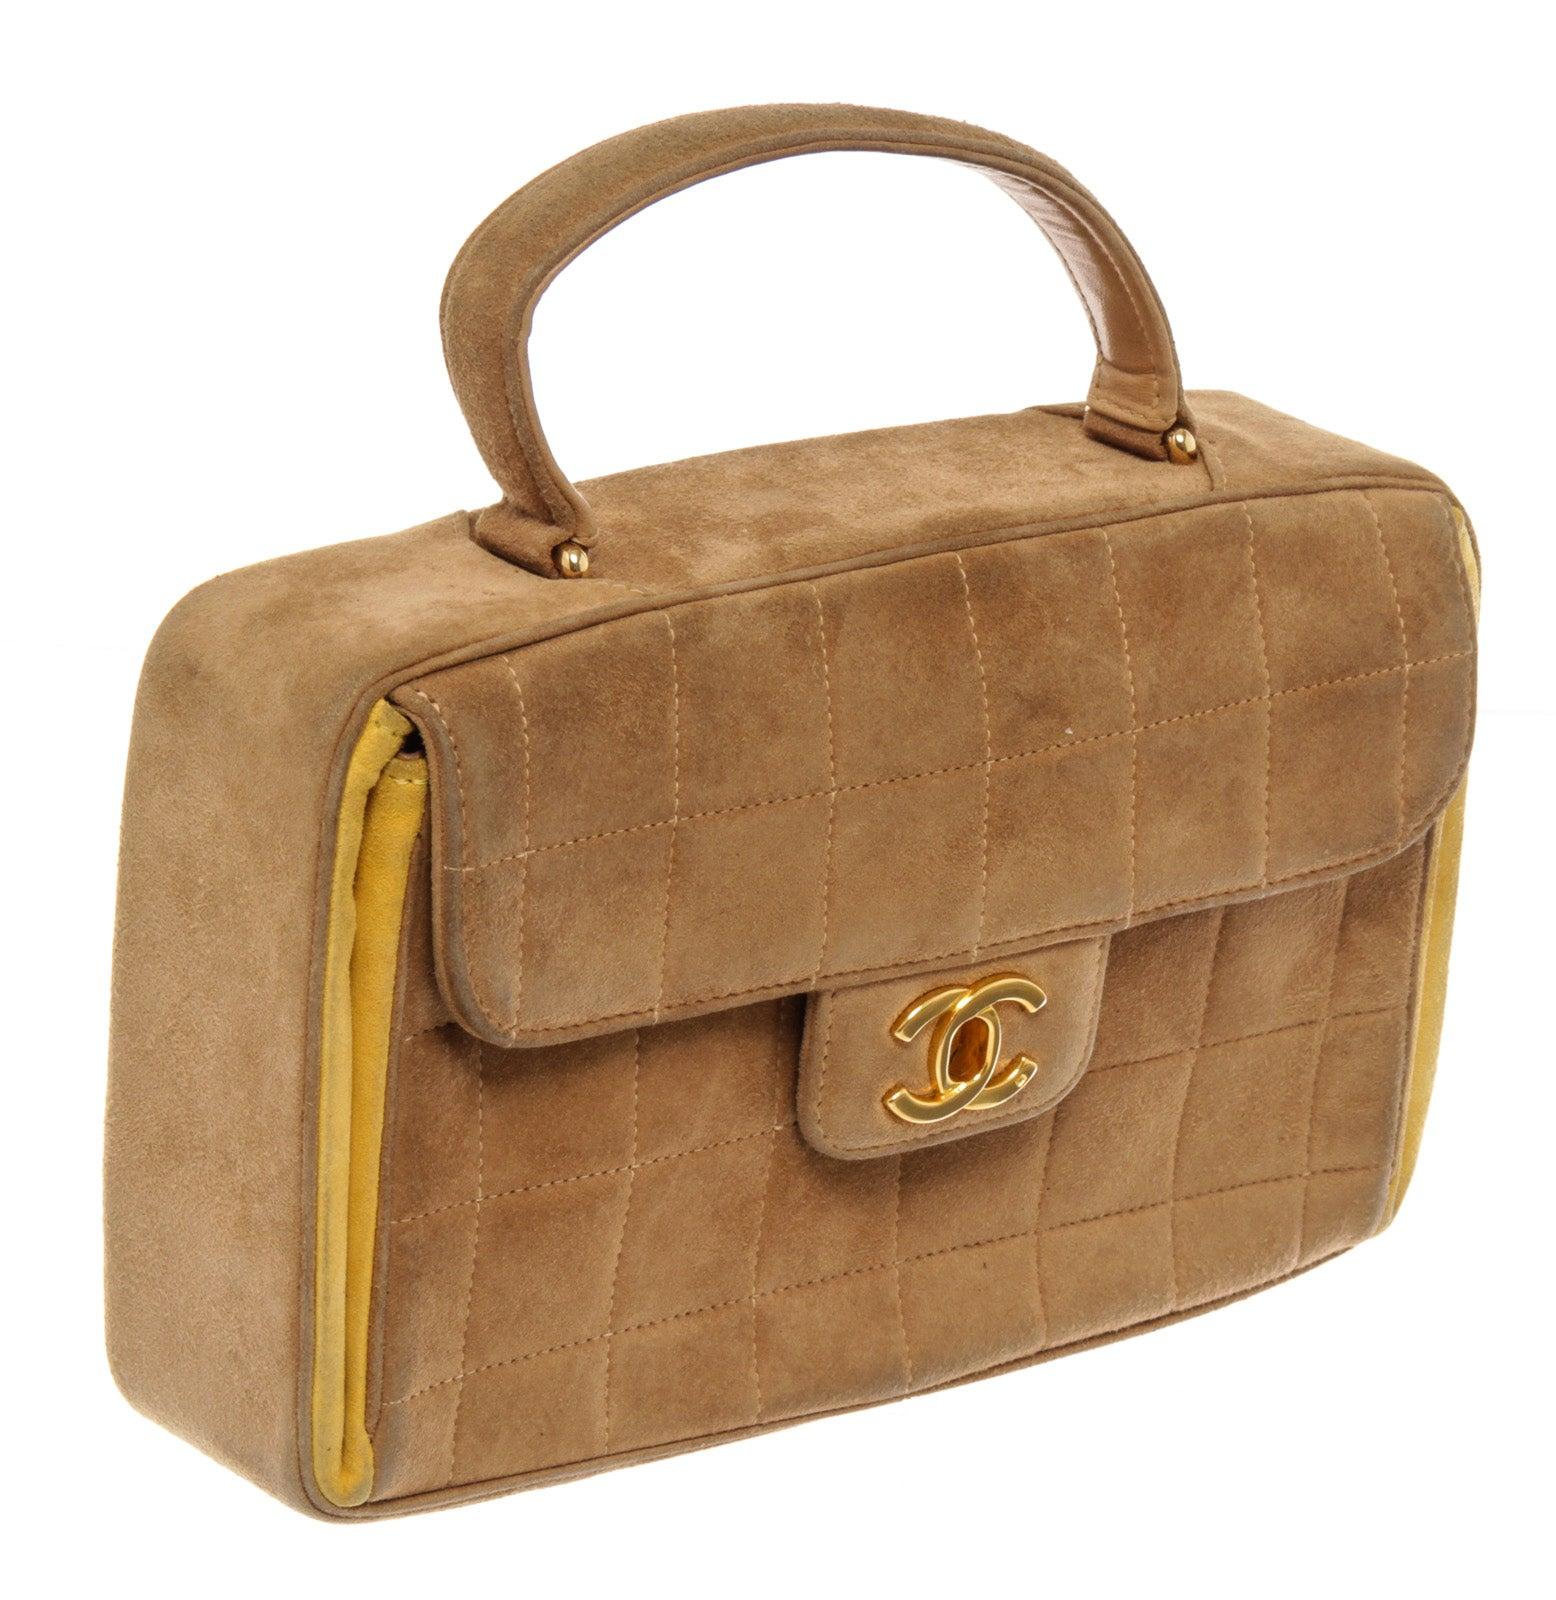 Chanel Chocolate Bar CC Top Handle Bag (CC Snap Replaced) is finely crafted of smooth suede leather in light beige with bright yellow accents. The bag features beige squared stitching and a polished interlocking CC gold-tone turn lock. This opens to